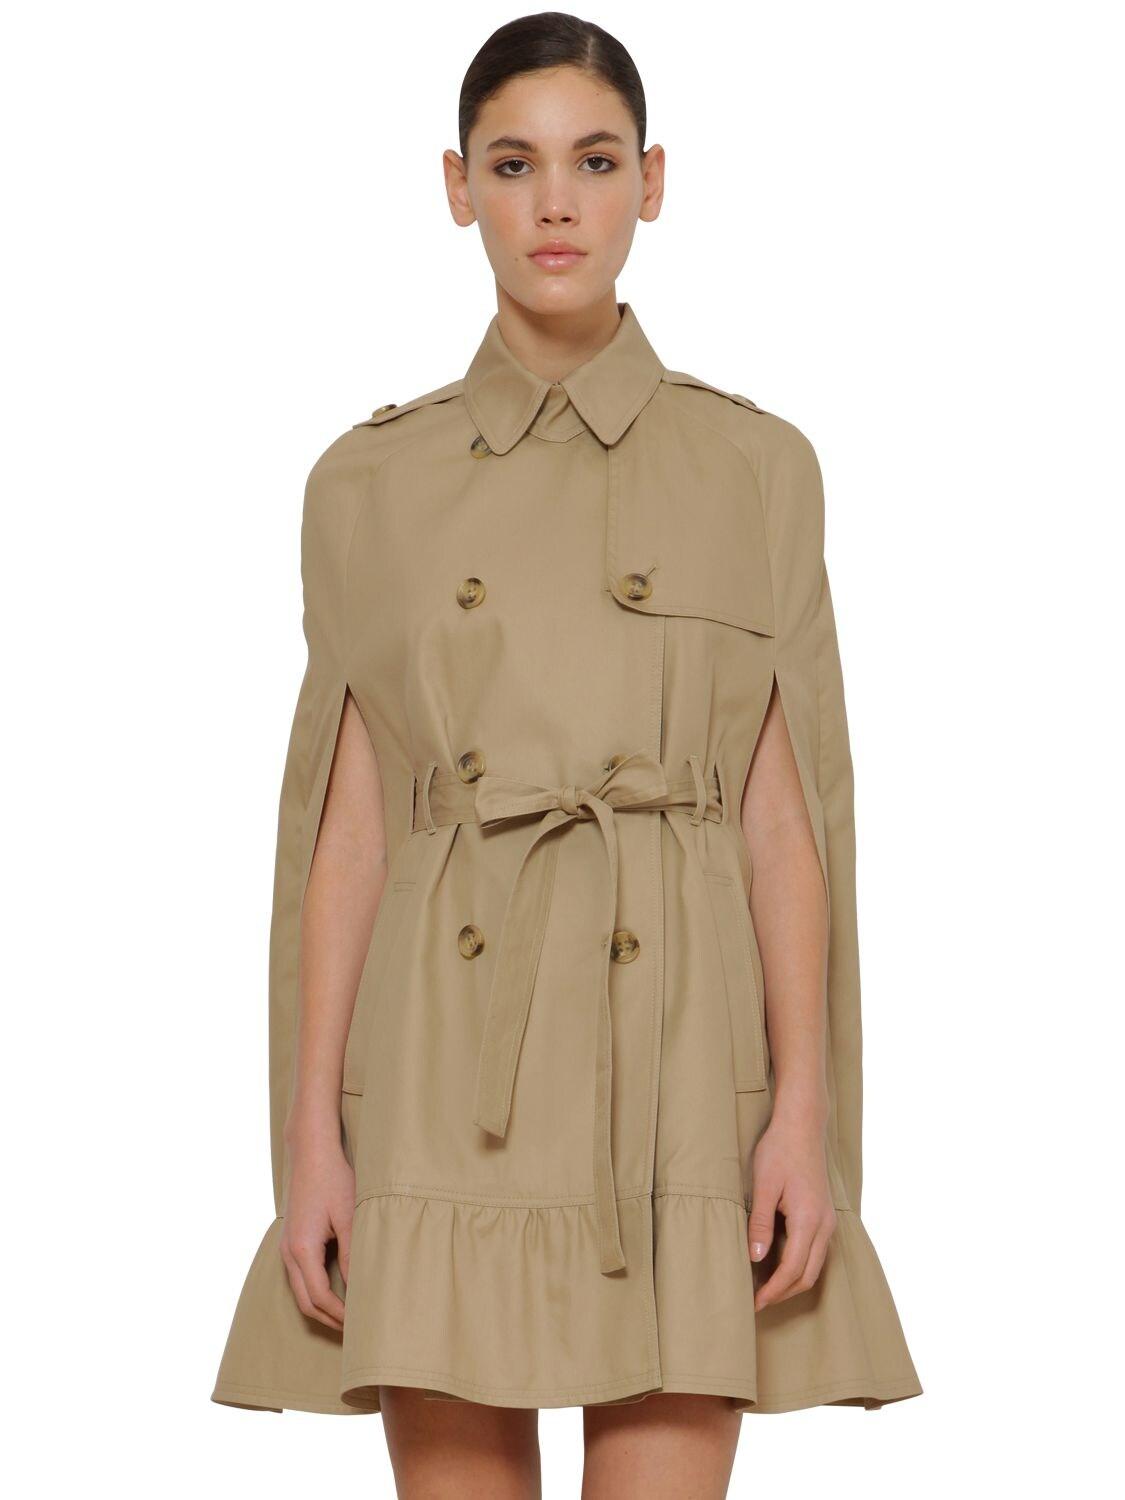 RED Valentino Cotton Cape Trench Coat in Beige (Natural) - Lyst